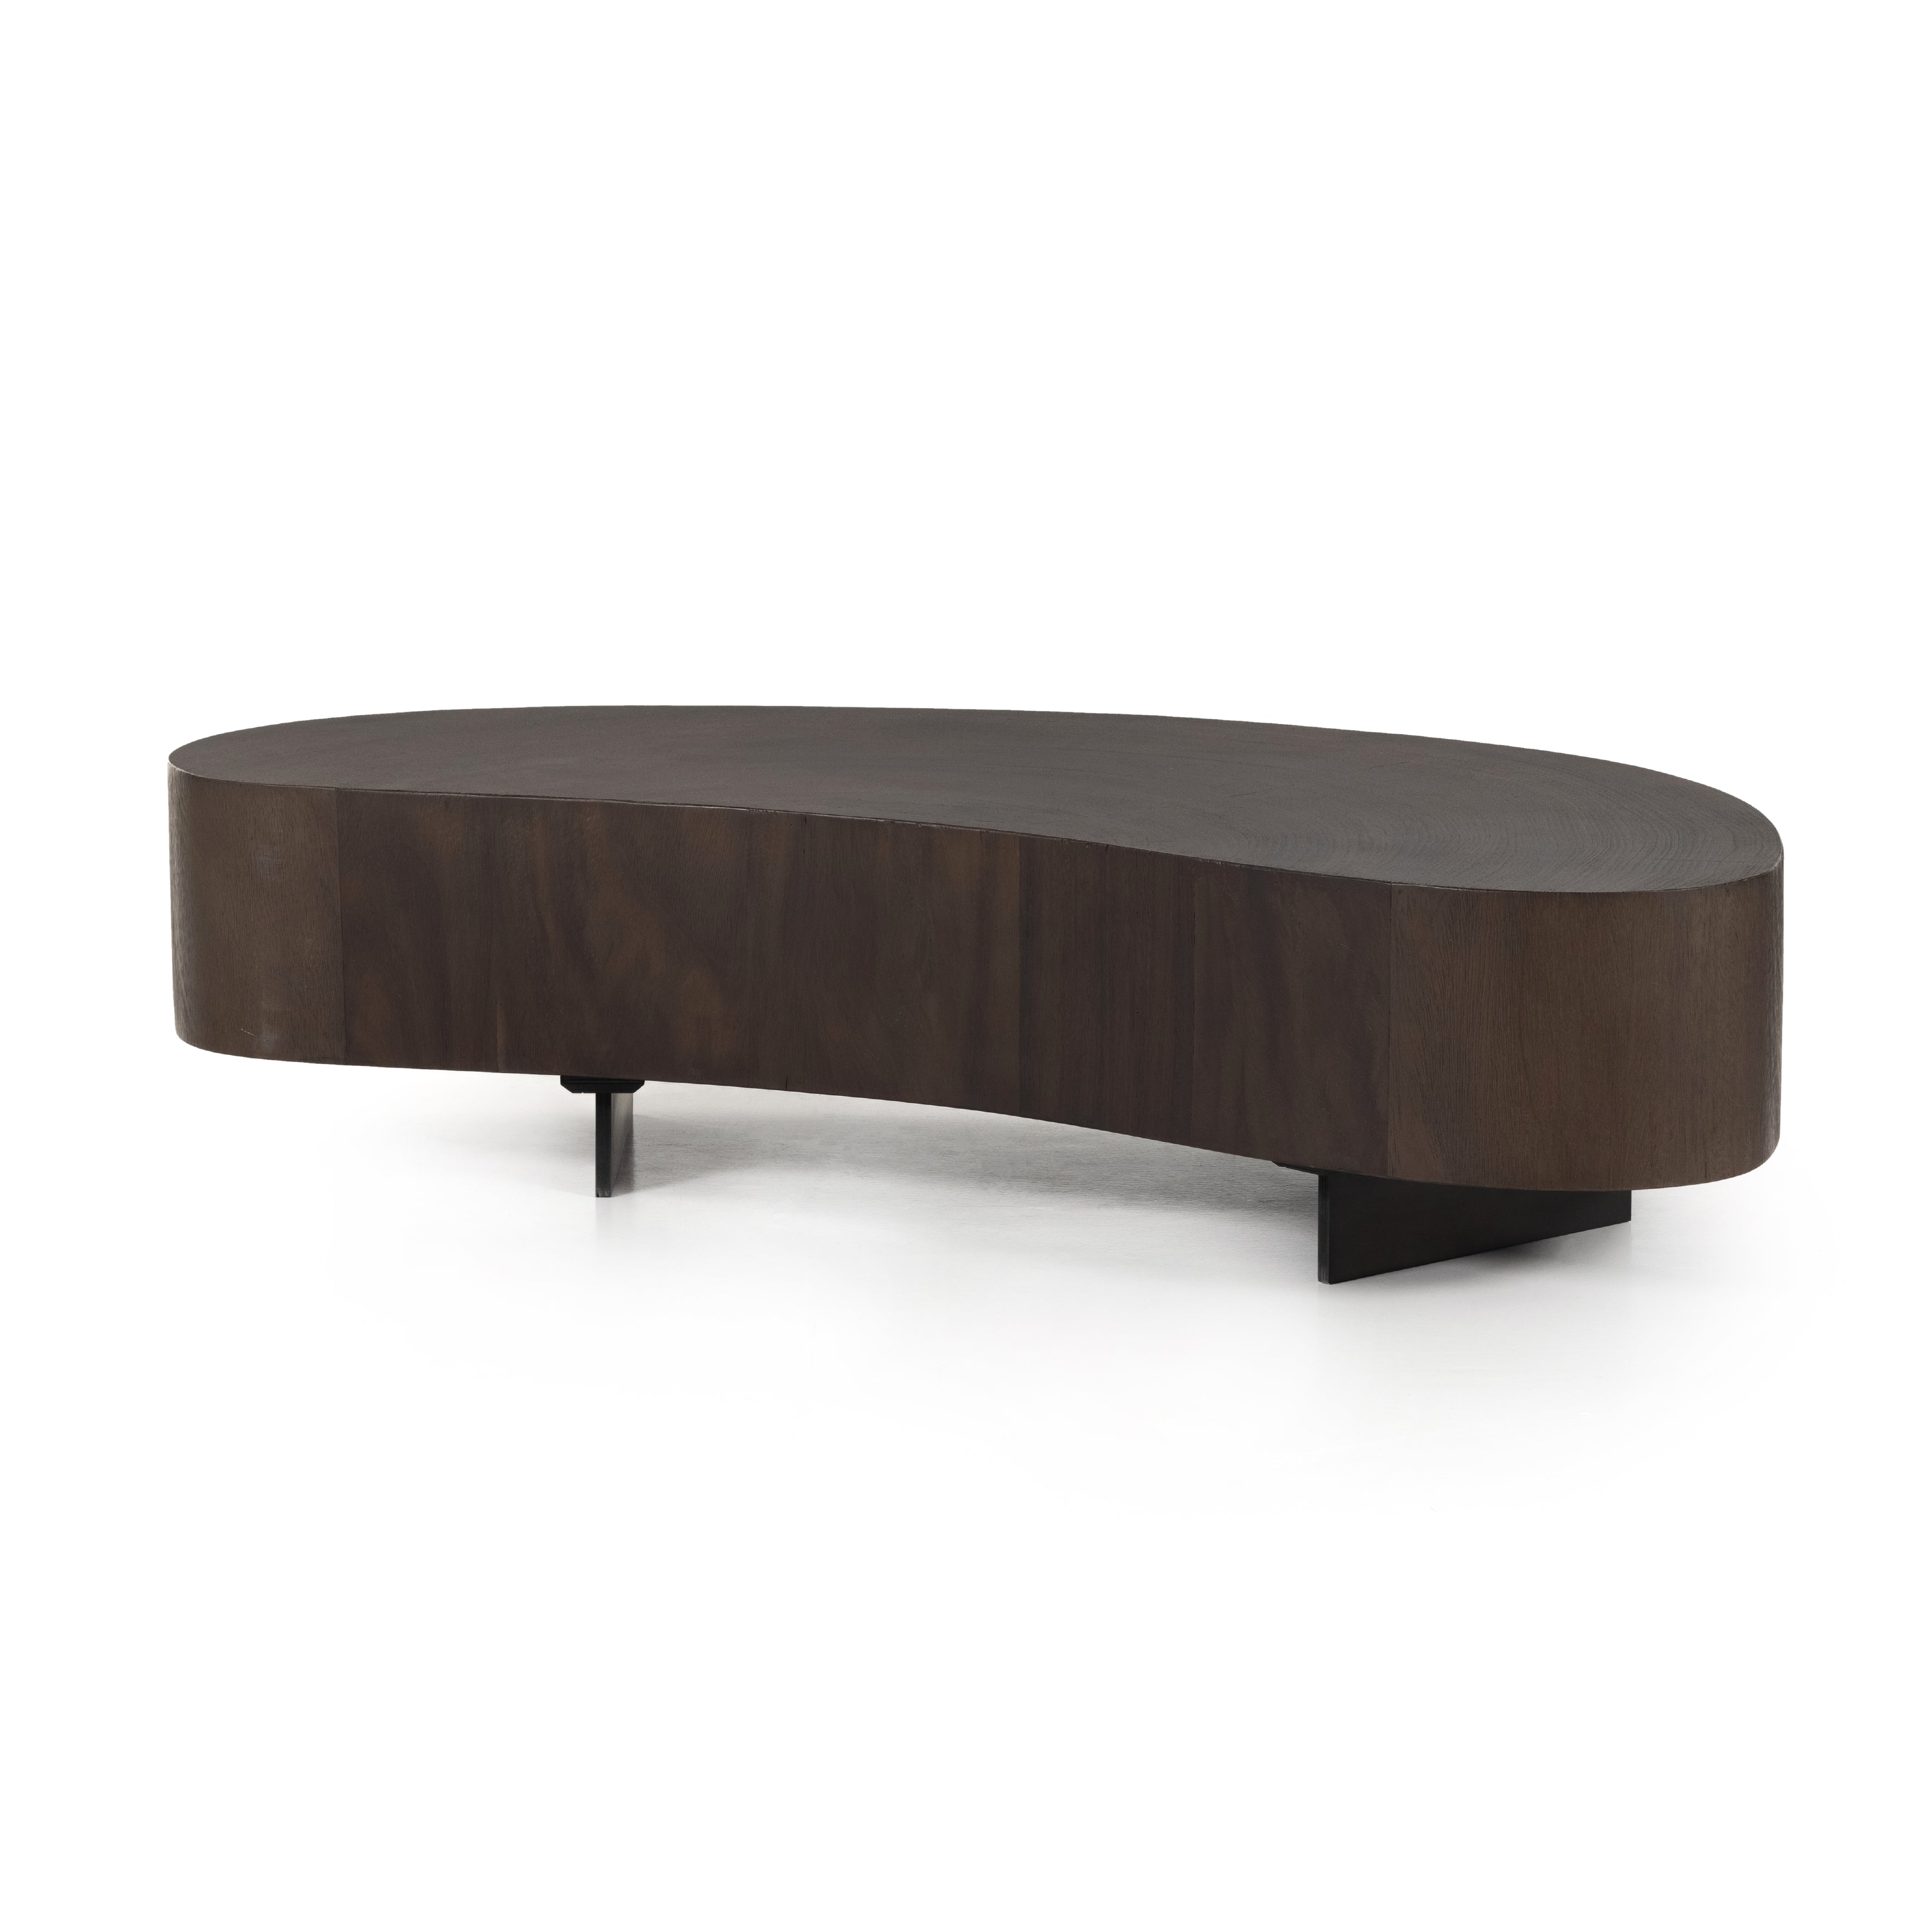 Natural beauty, total novelty. Oyster-cut Guanacaste forms a petite, kidney-shaped coffee table. Visible rings speak to woods' natural graining, while a dark gunmetal-finished base provides clean contrast to the whole look. Option to pair with taller piece, sold separately. Amethyst Home provides interior design, new construction, custom furniture, and area rugs in the Miami metro area.